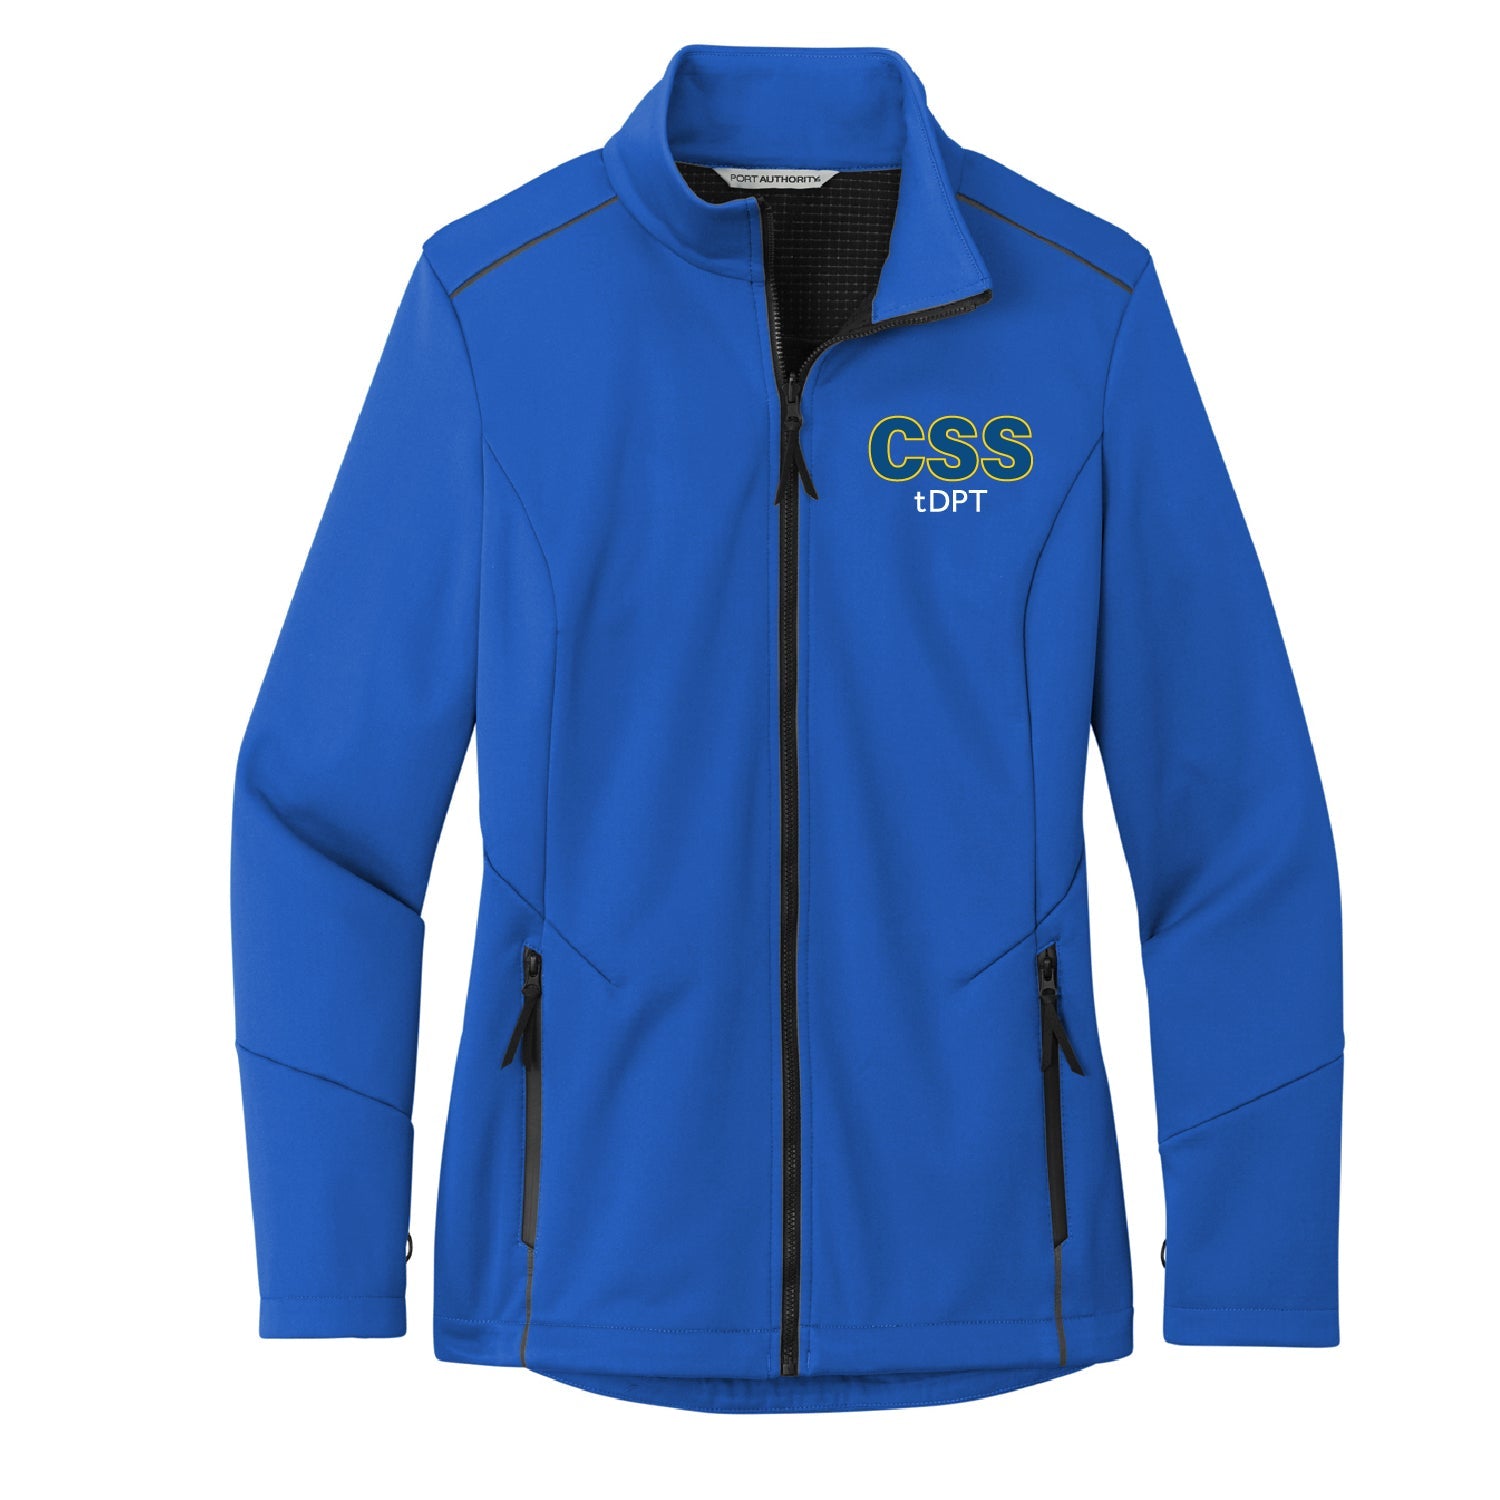 CSS tDPT Ladies Collective Tech Soft Shell Jacket - DSP On Demand